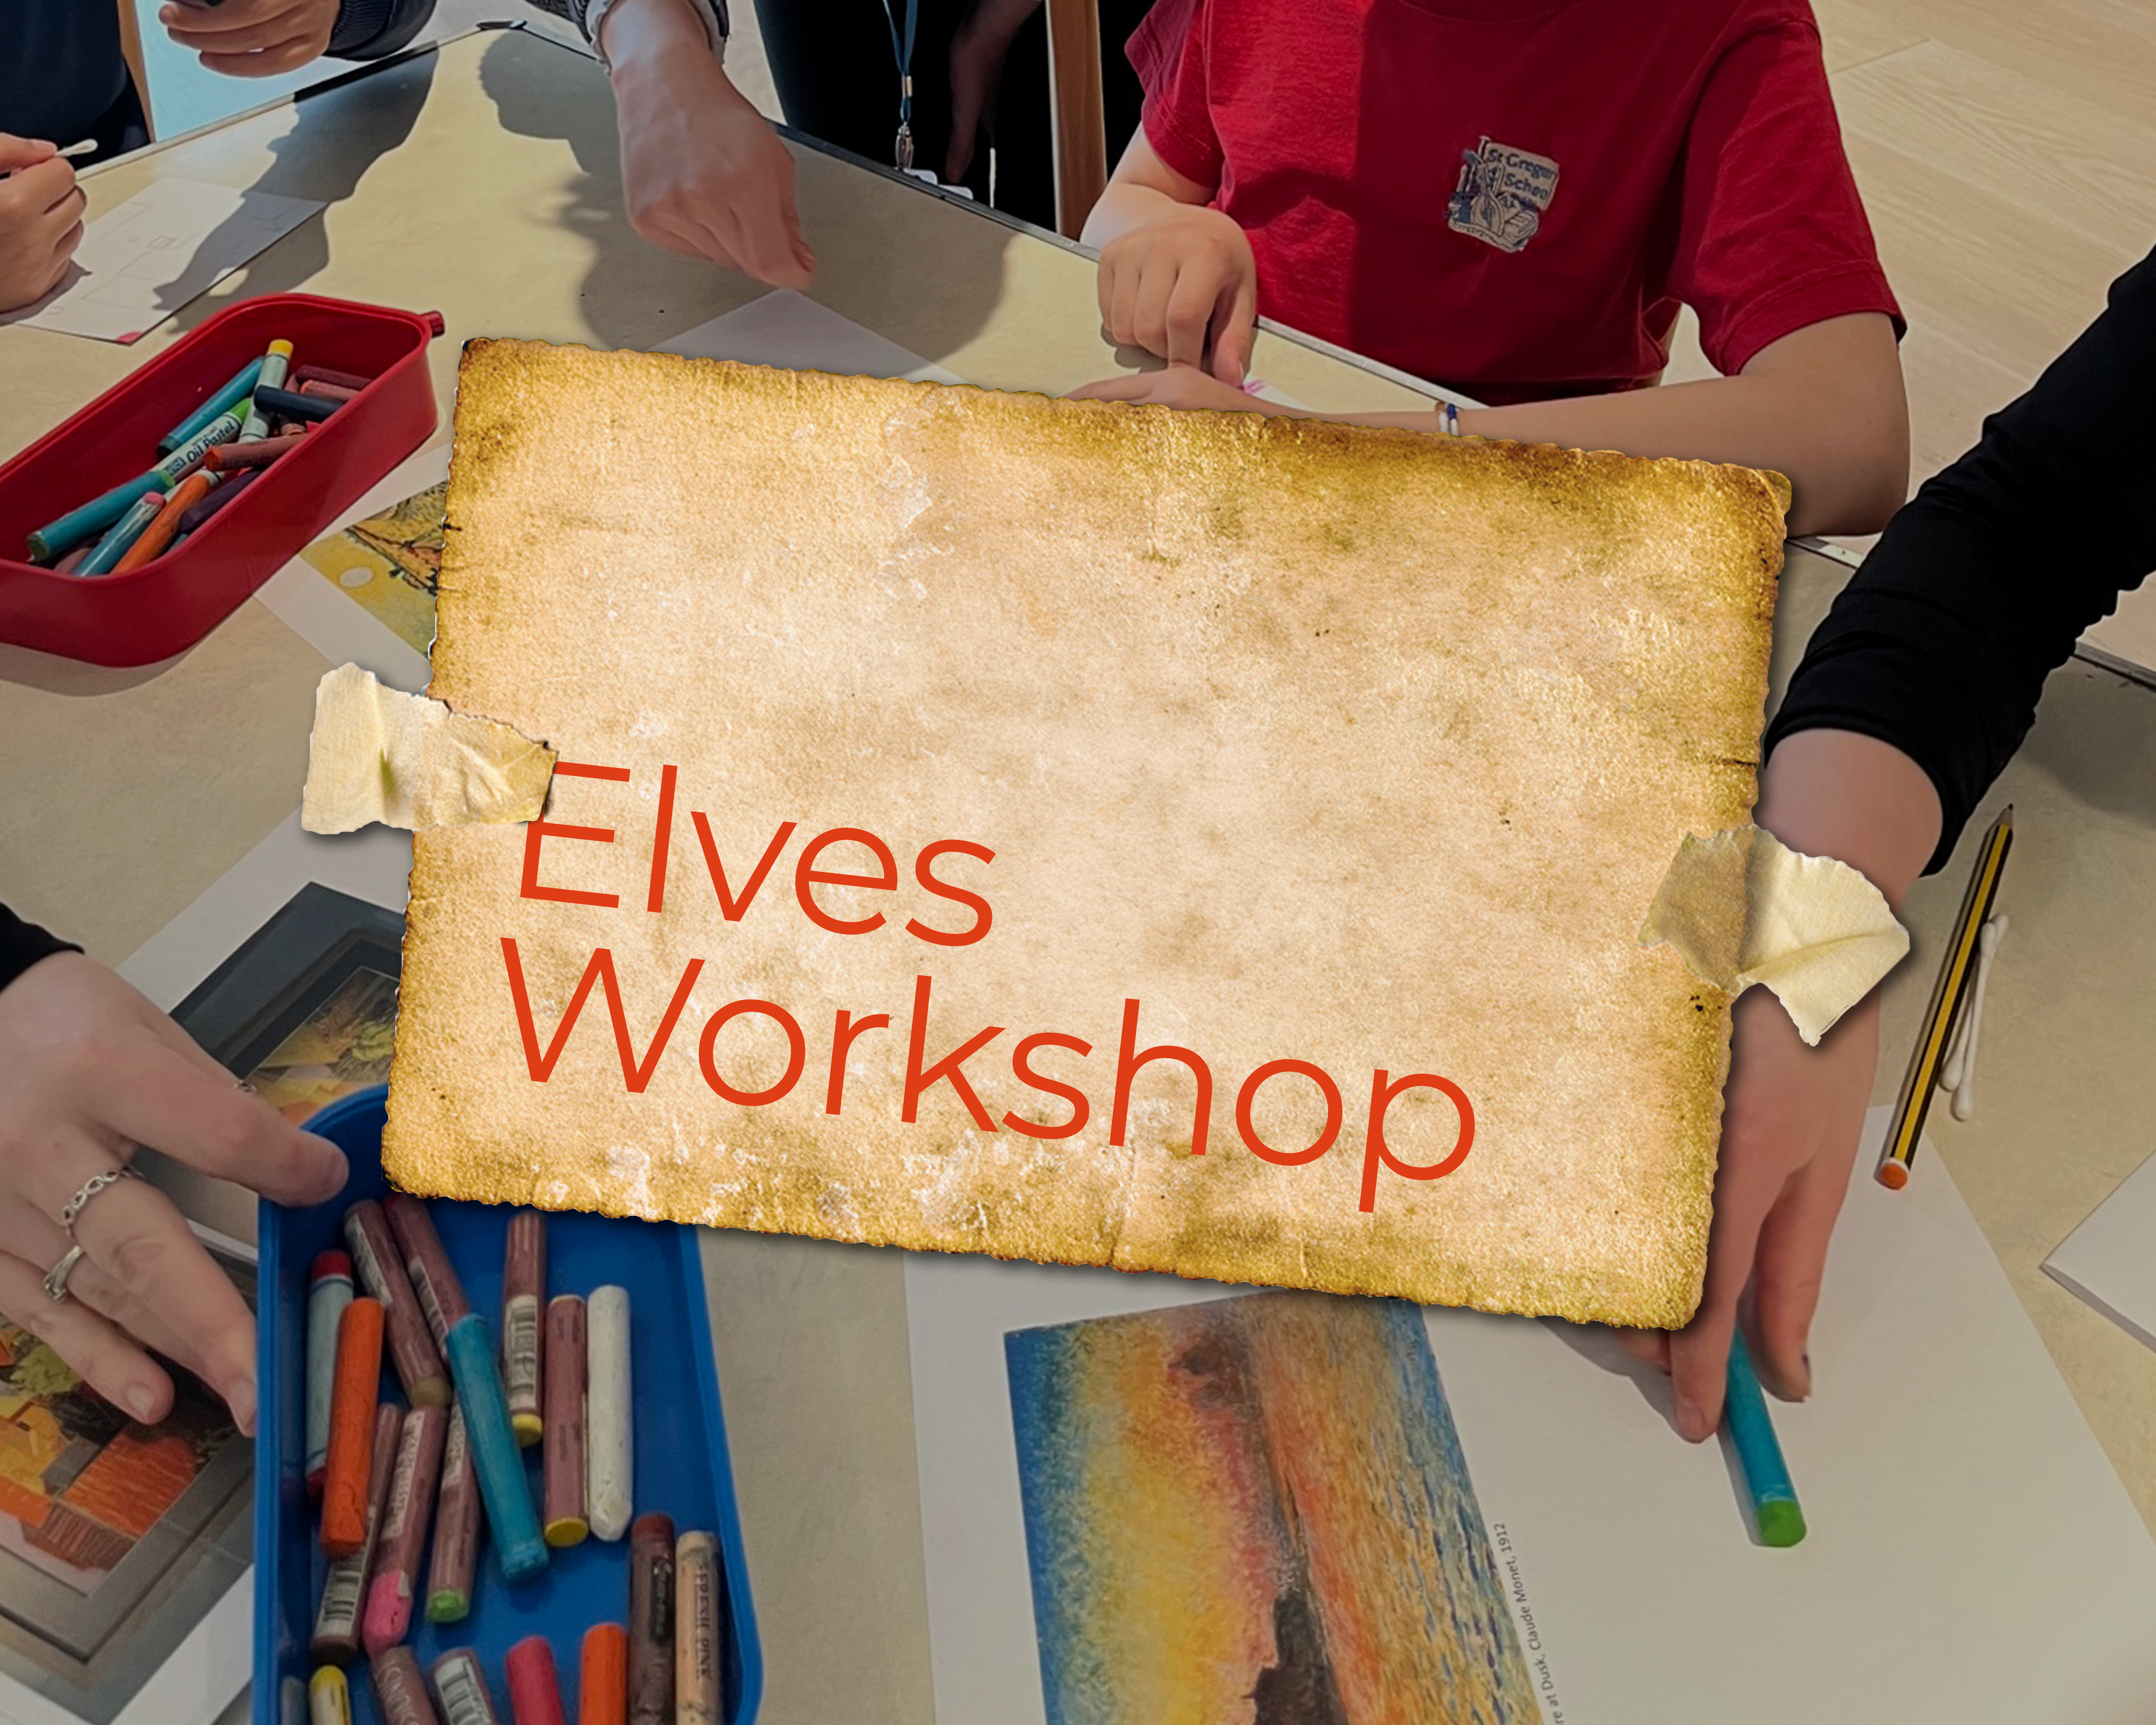 An image of young people drawing with pastels. Overlayed is a piece of paper with the words 'Elves Workshop' on it.